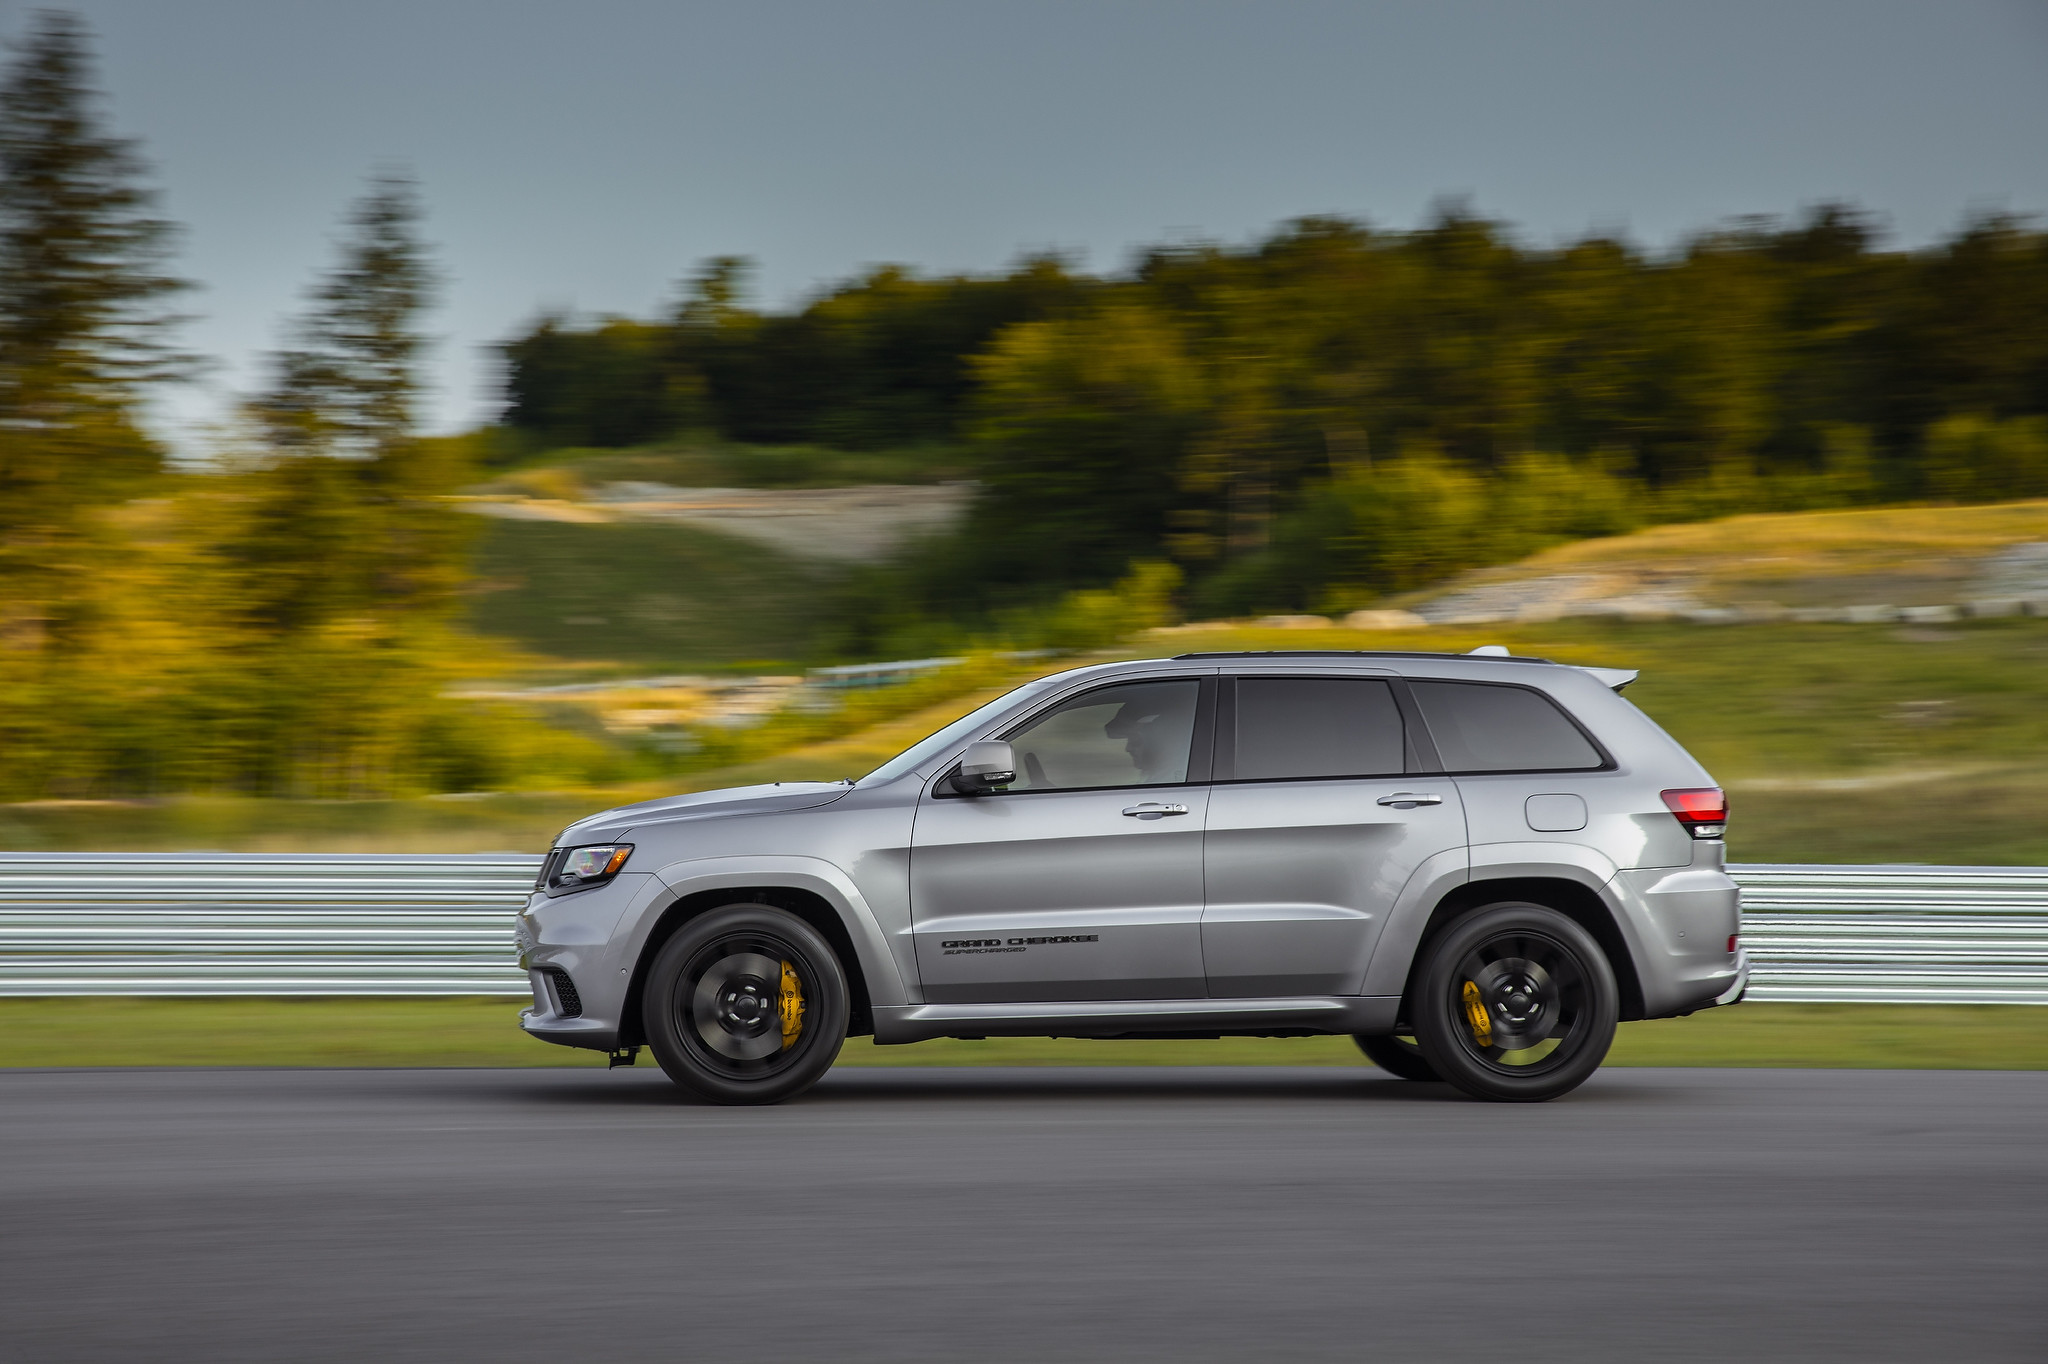  Person wearing a helmet driving a 2021 Jeep Grand Cherokee Supercharged on a racetrack